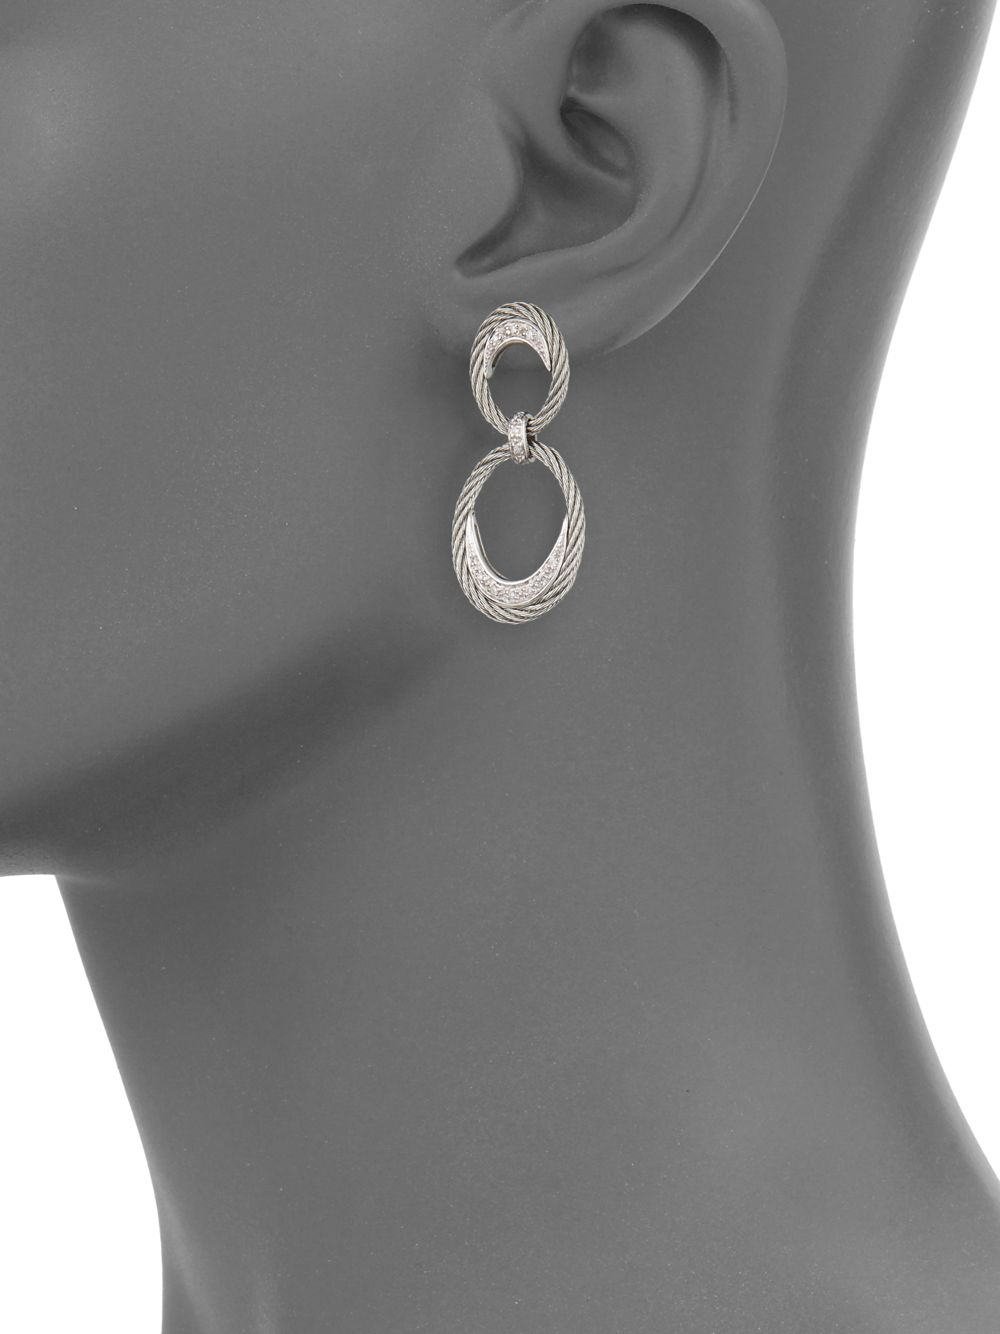 Charriol Diamond Stainless Steel 18k White Gold Crescent Cable Link Earrings in Metallic - Lyst